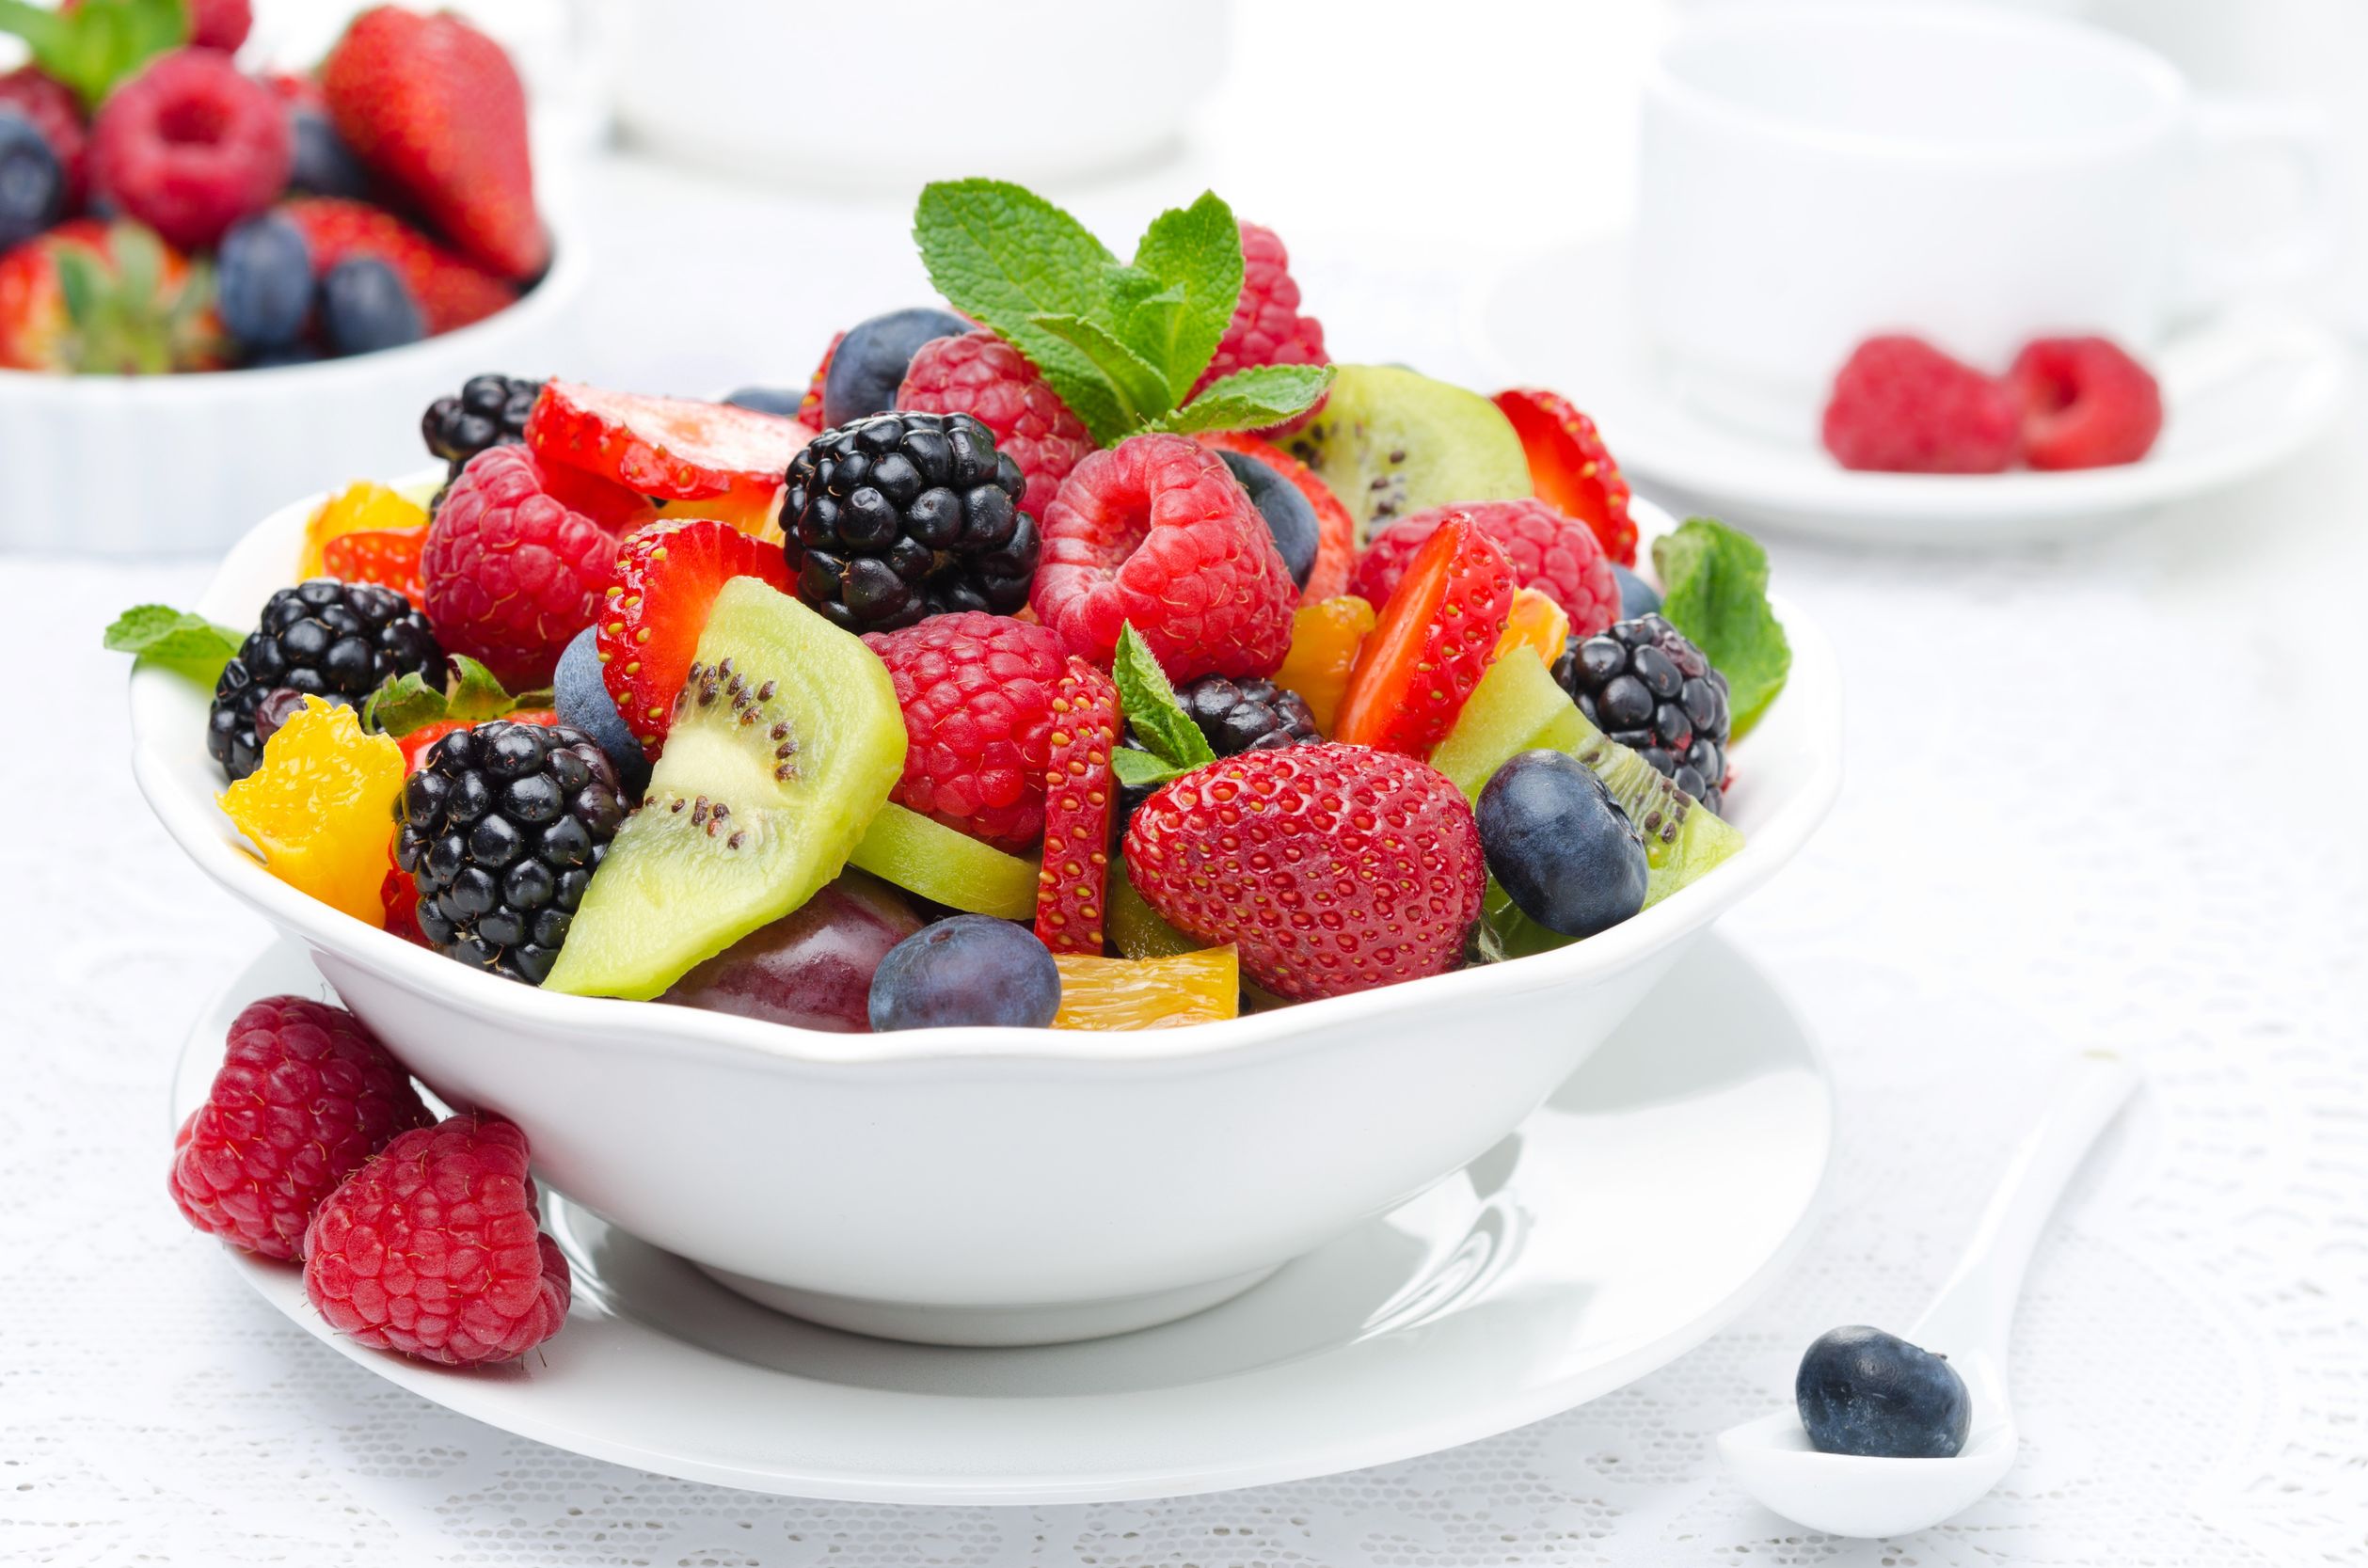 Fruits as a natural food product can be used to manage acidity –